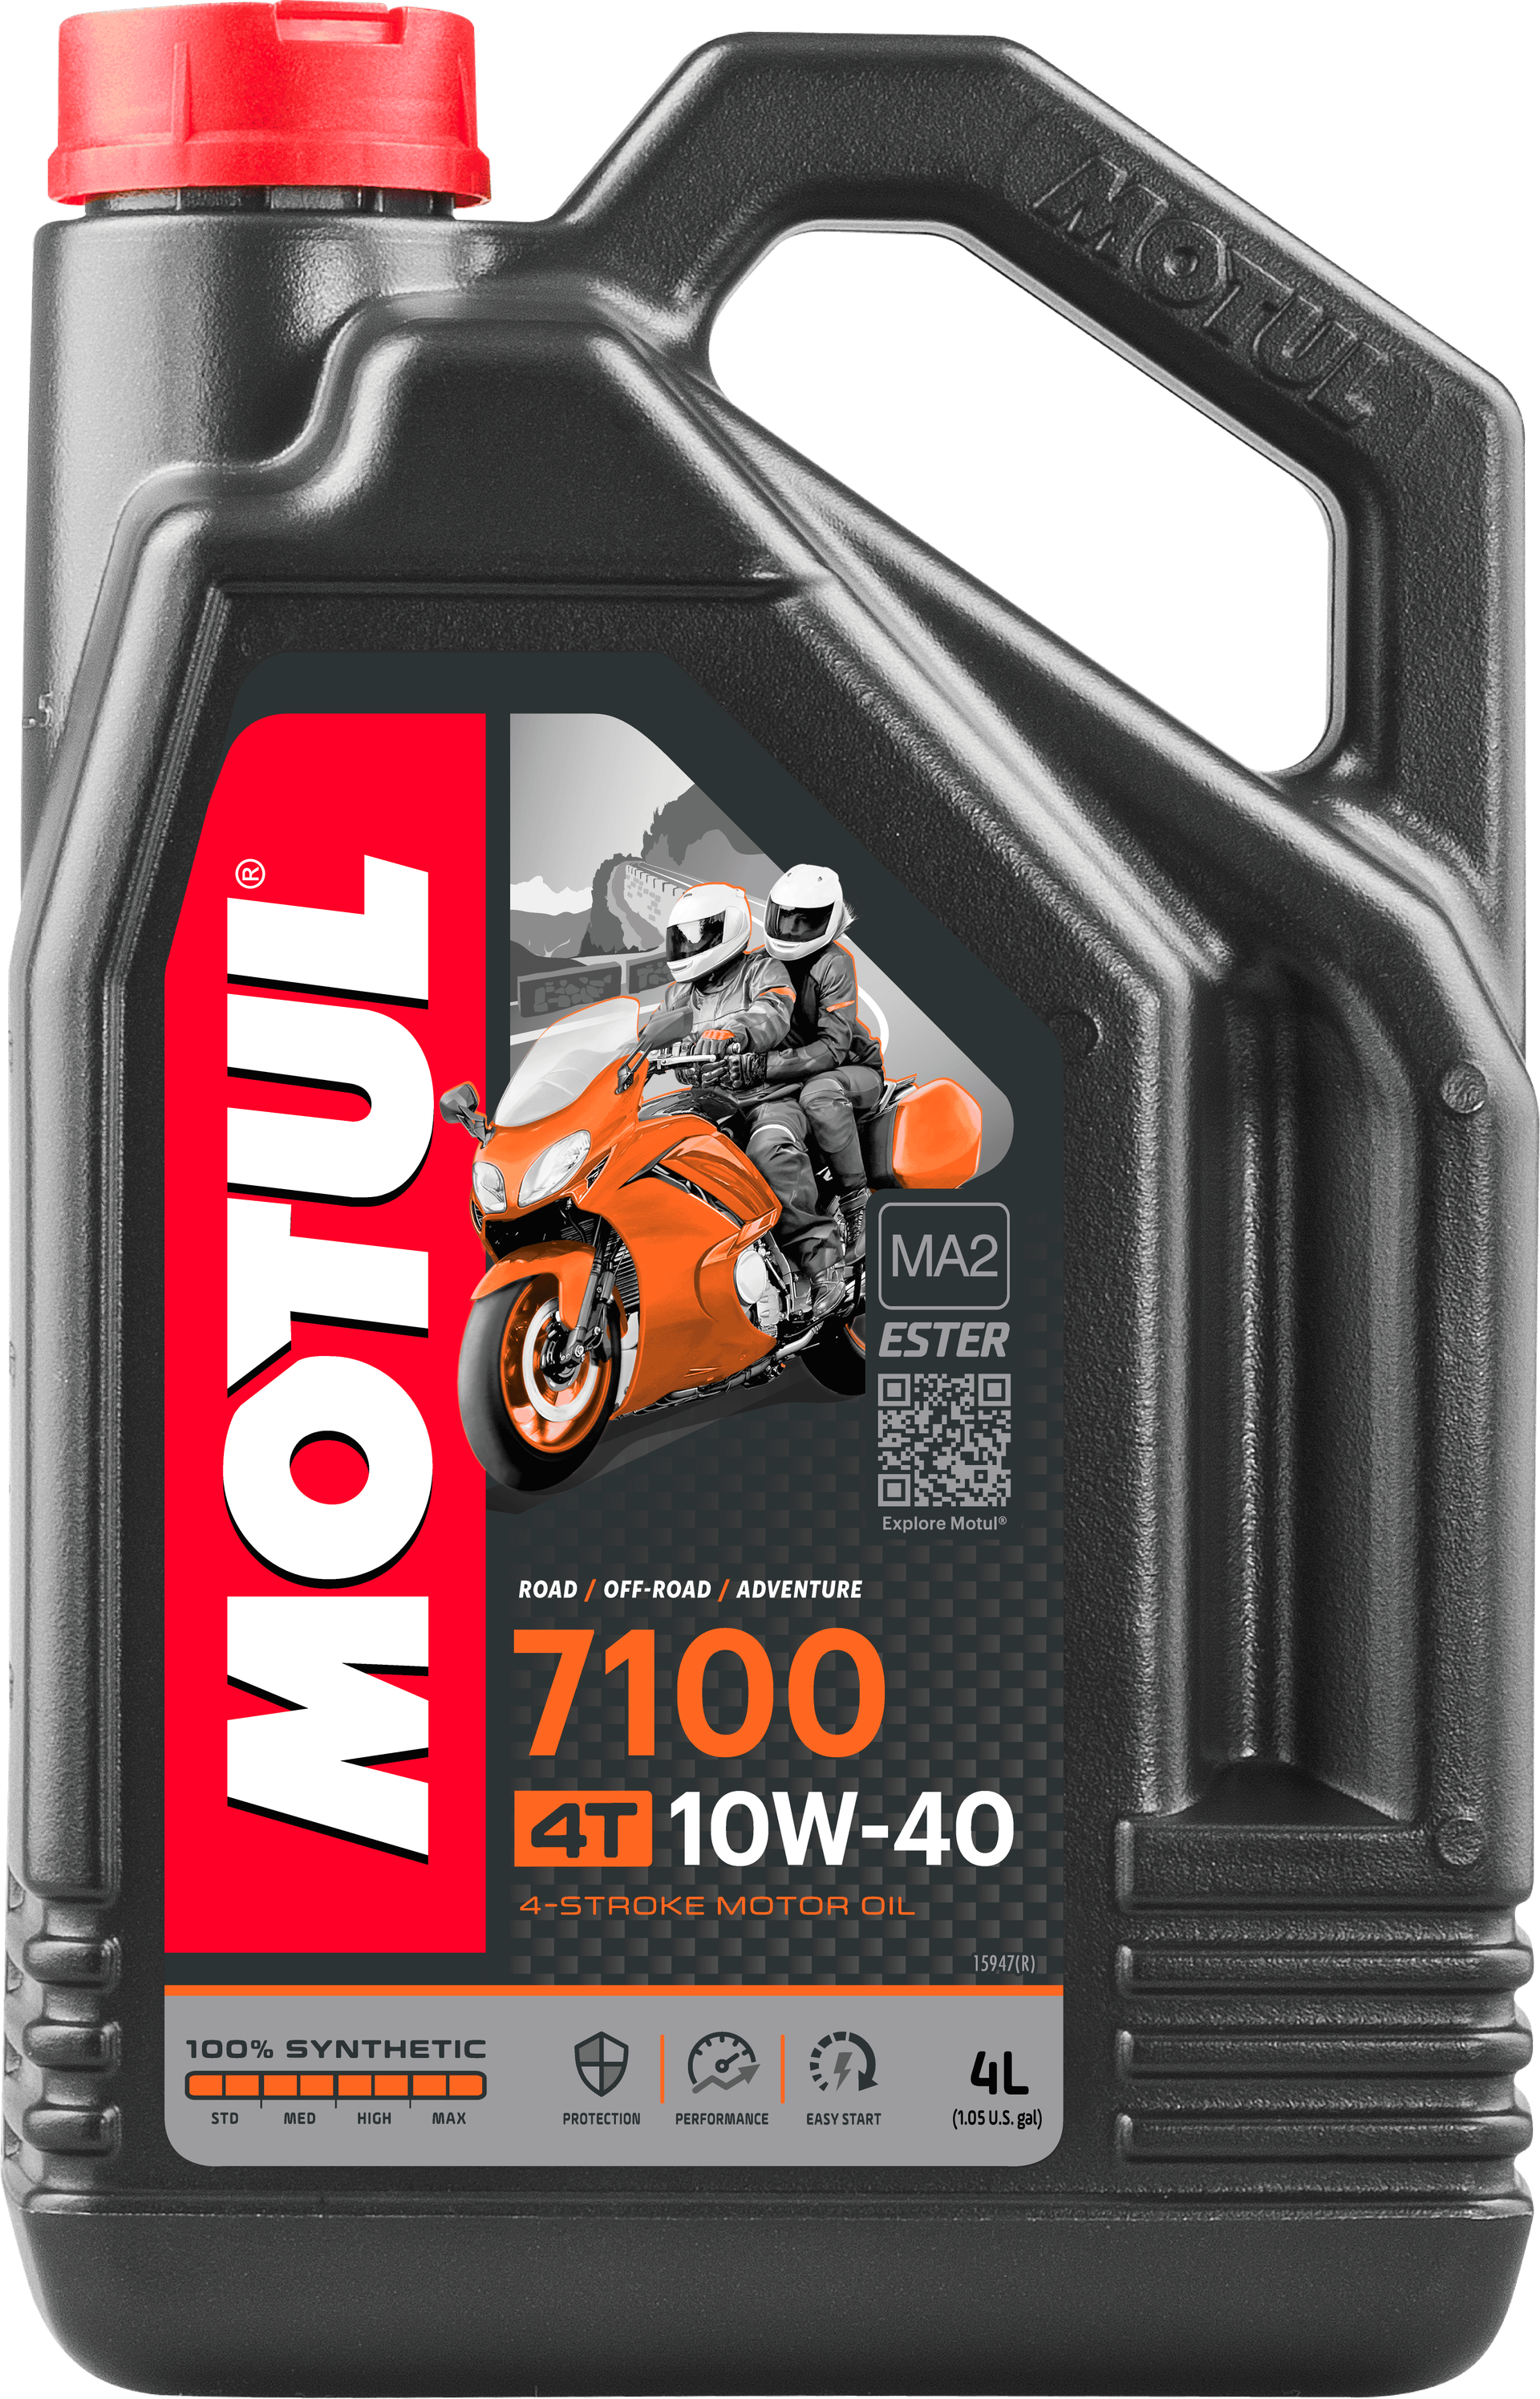 Motul 8100 Fully Synthetic Oils — The Swiss Army Knife of Engine Lubricants  –